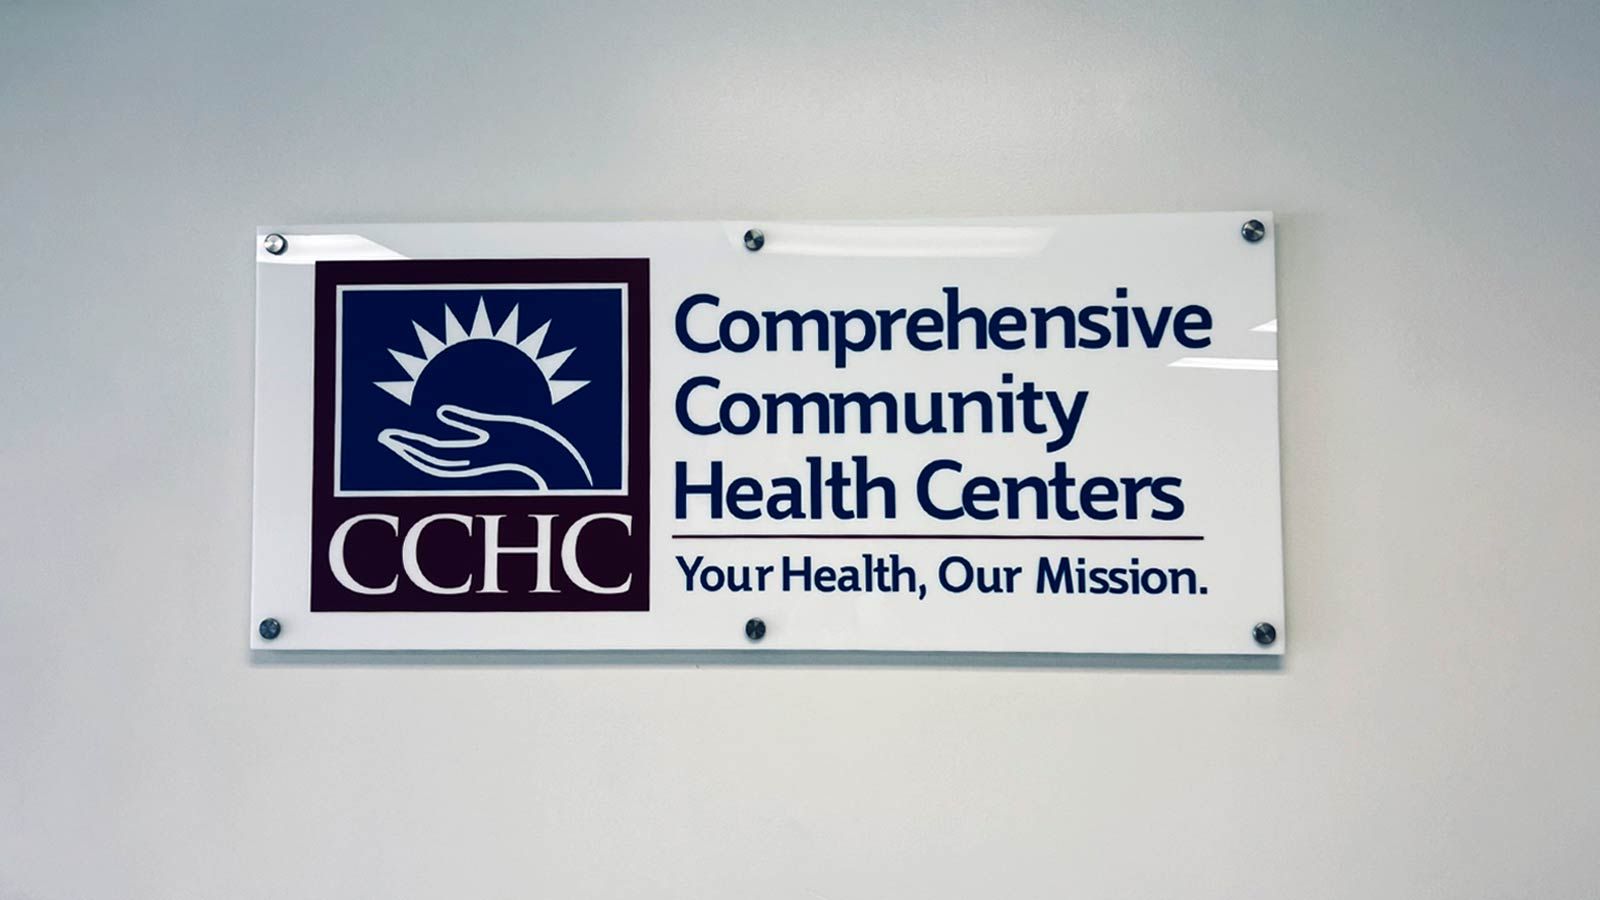 Comprehensive Community Health Centers office sign on a wall